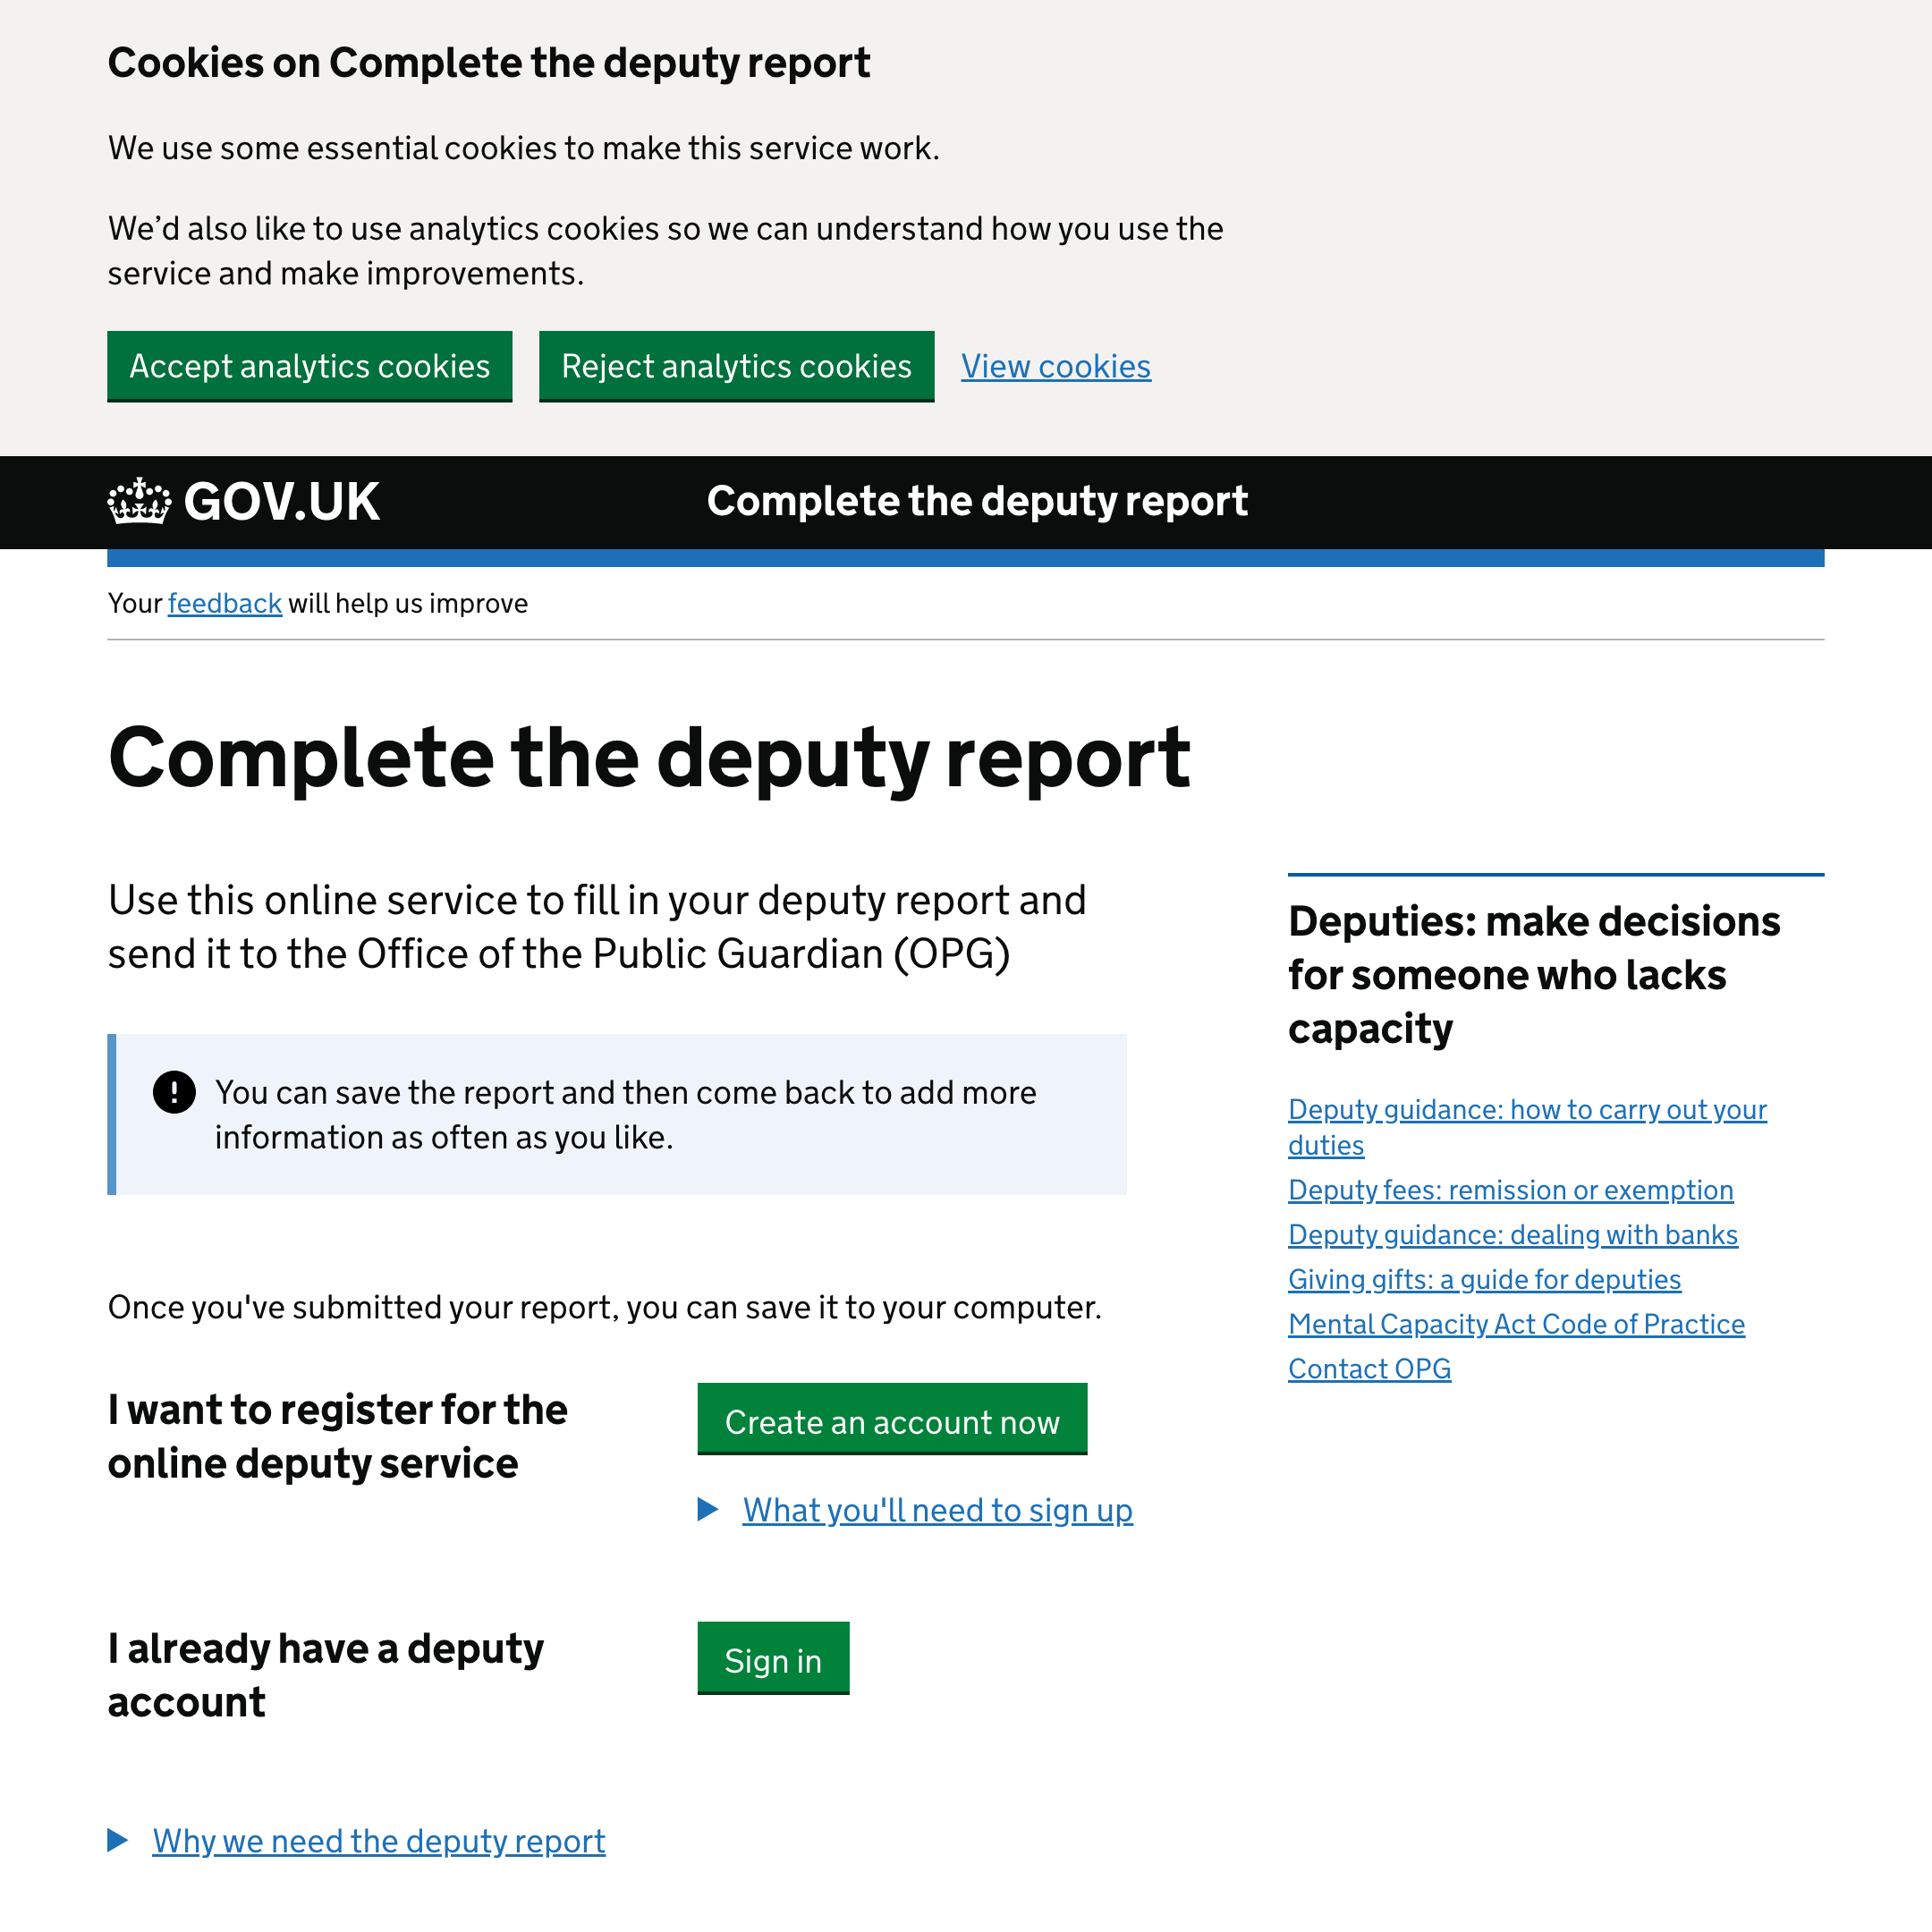 Complete the deputy report